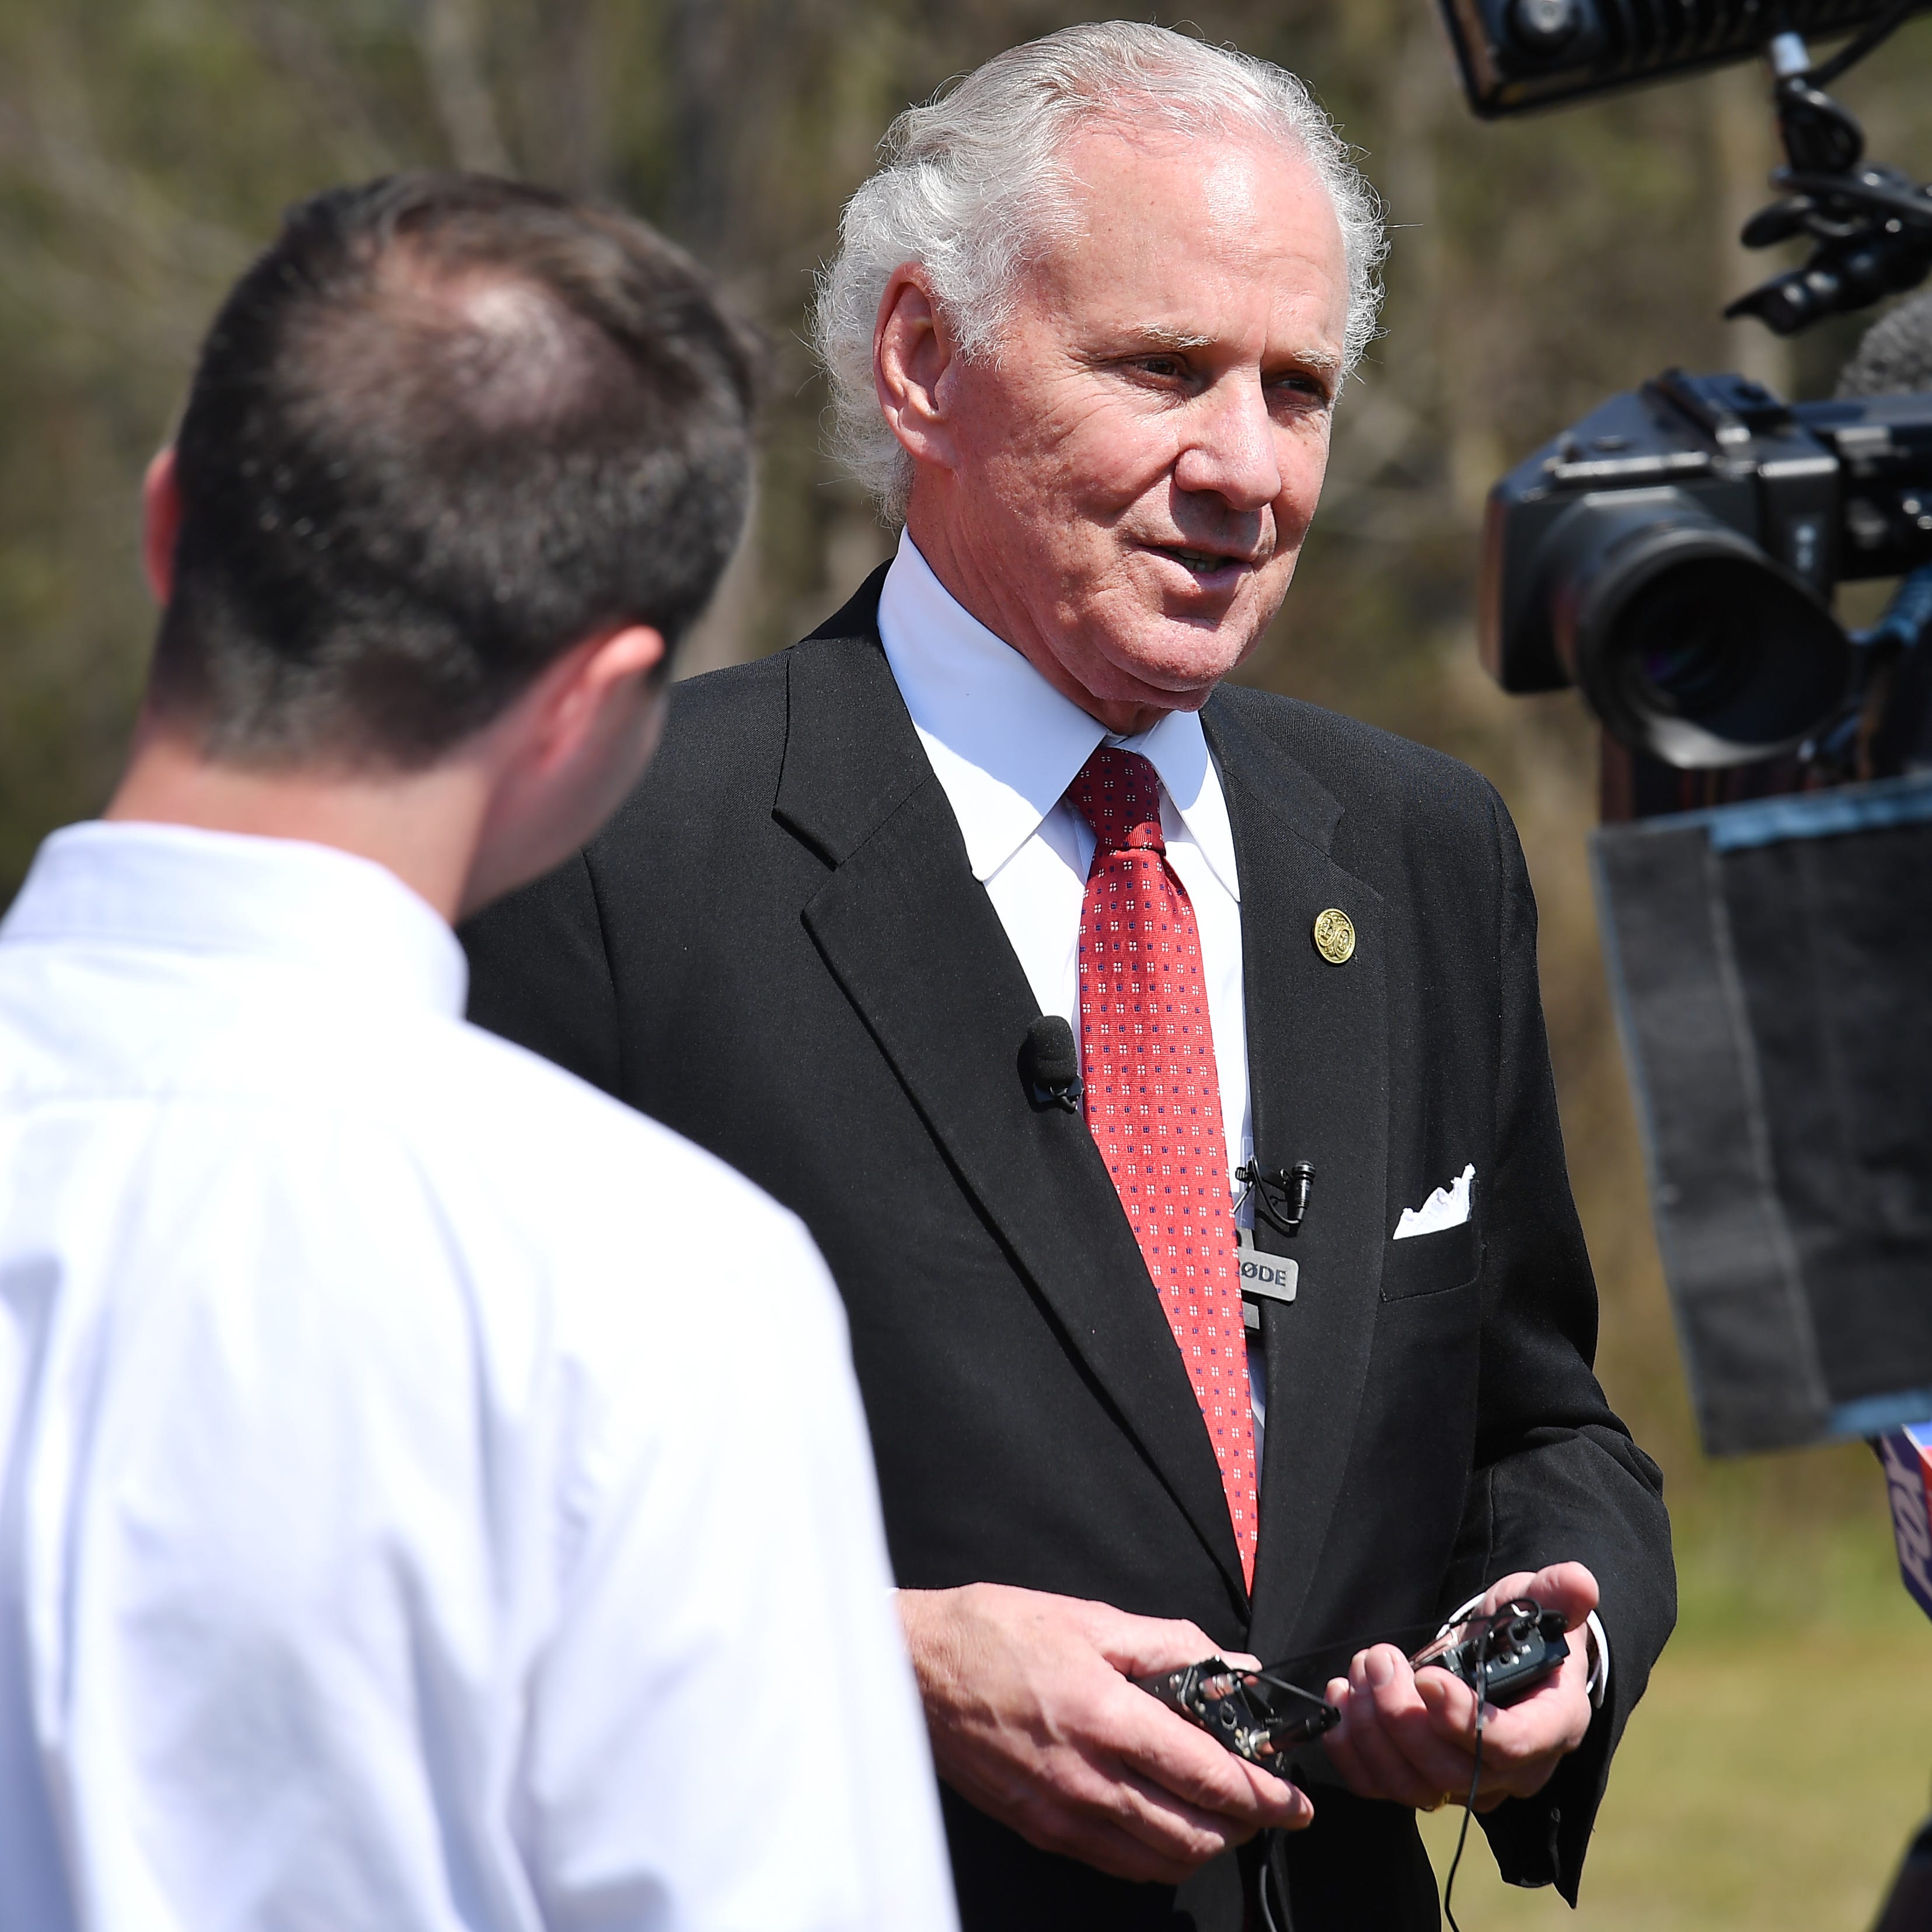 South Carolina Gov. Henry McMaster and other local Spartanburg County officials attended the groundbreaking of the site of the new Milo's Tea facility in Moore on March 23, 2023.  The facility will be at the corner of US-221 Highway and SC-290 Highway in Moore. South Carolina Gov. Henry McMaster took the time to speak to the media after the event.